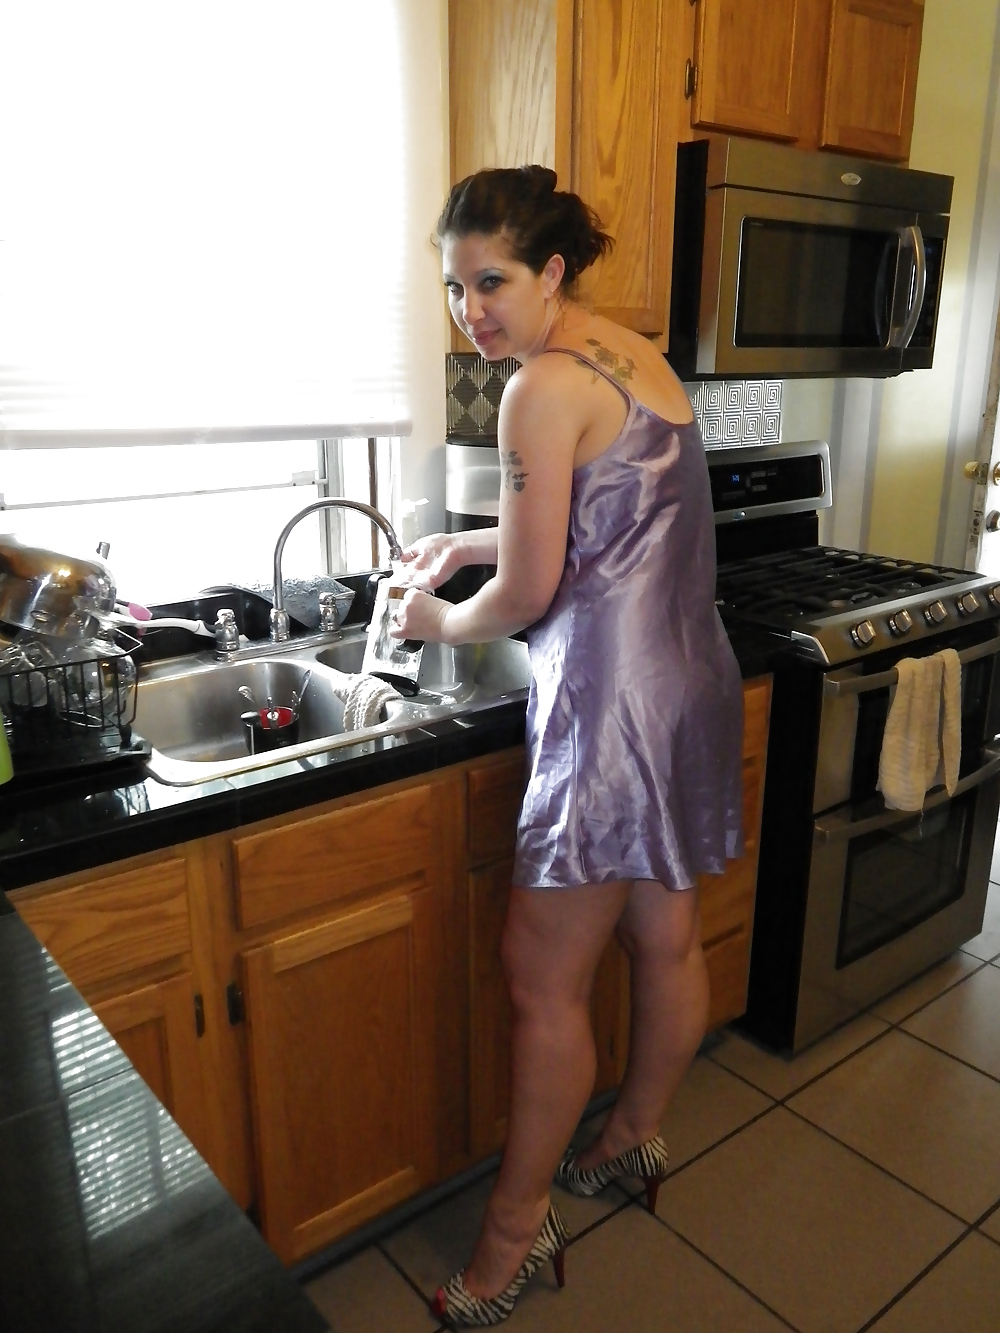 doing her wifey chores pict gal